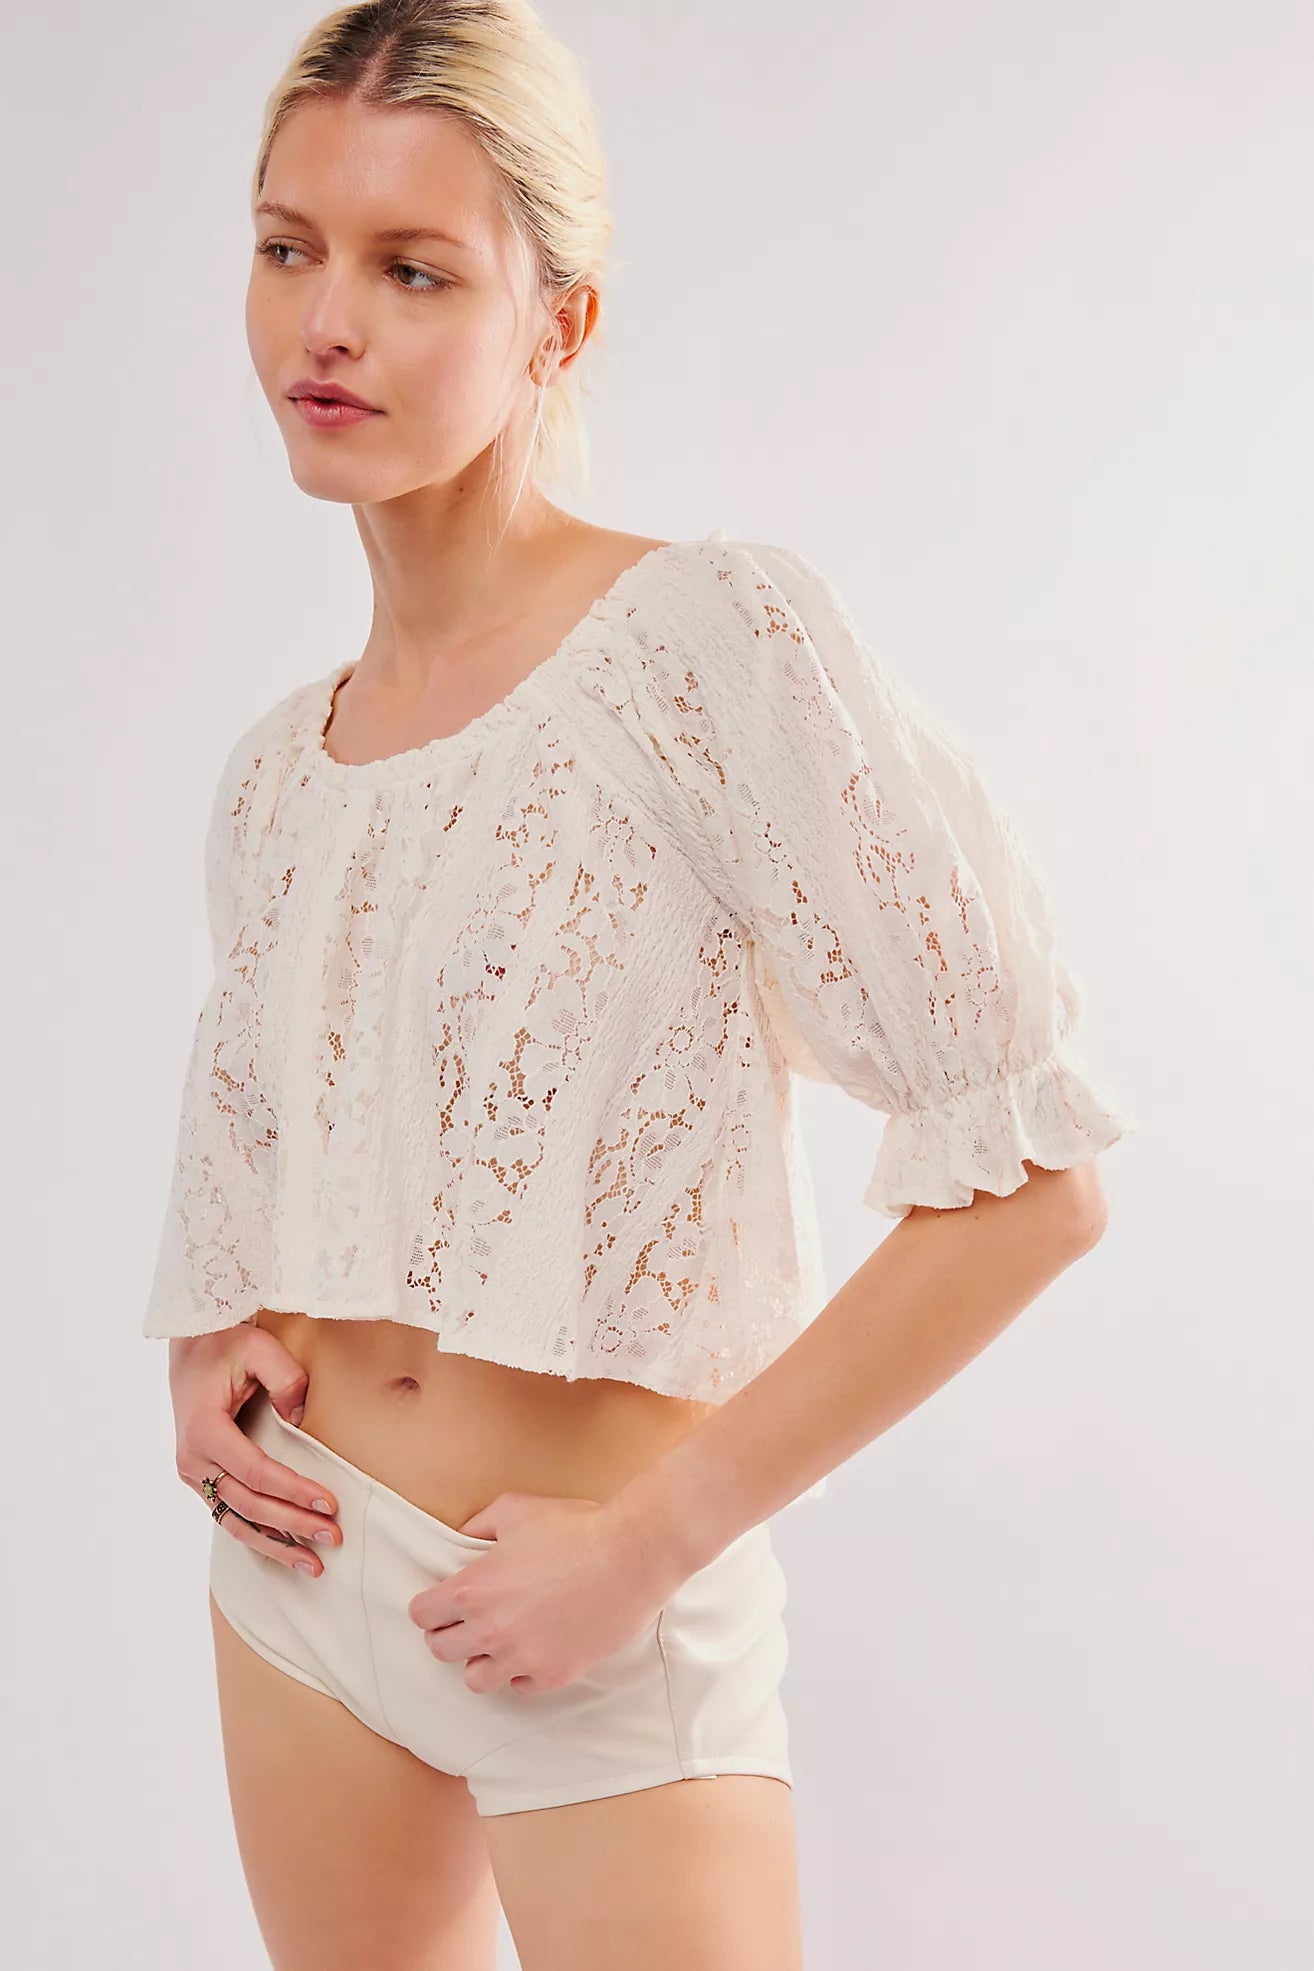 FREE PEOPLE Stacey lace top | The Salty Babe